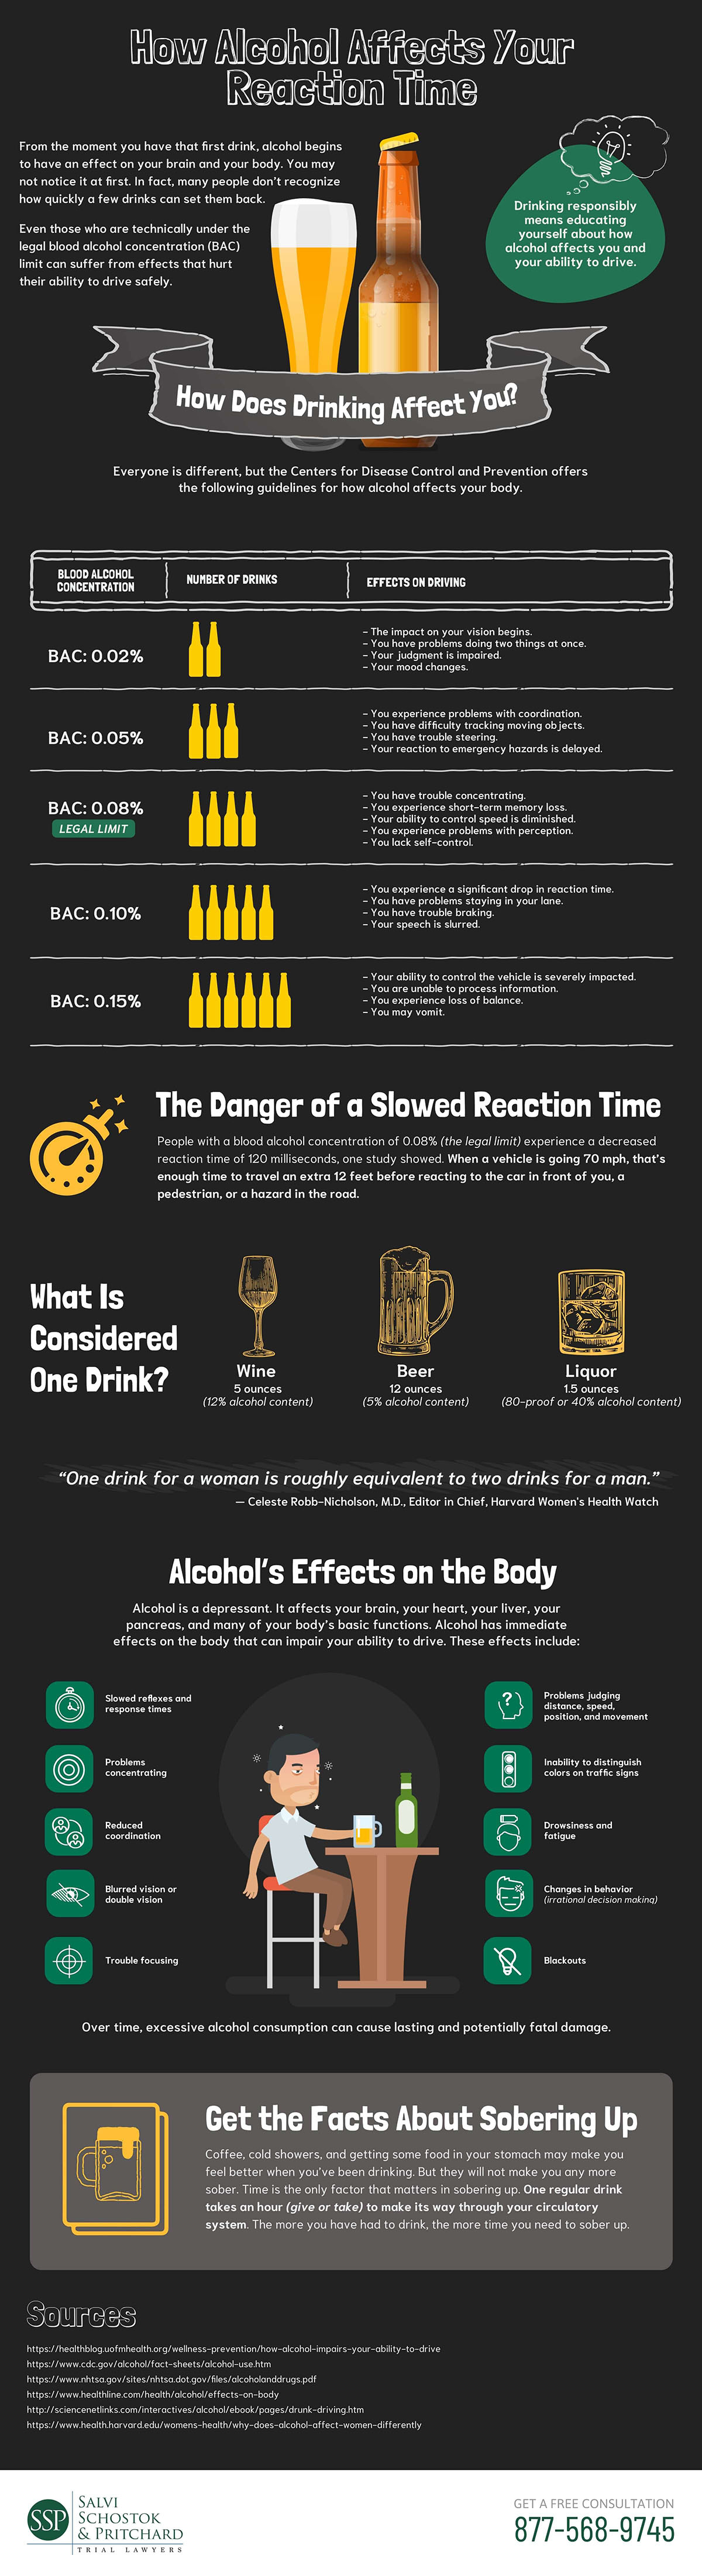 How Alcohol Affects Your Reaction Time